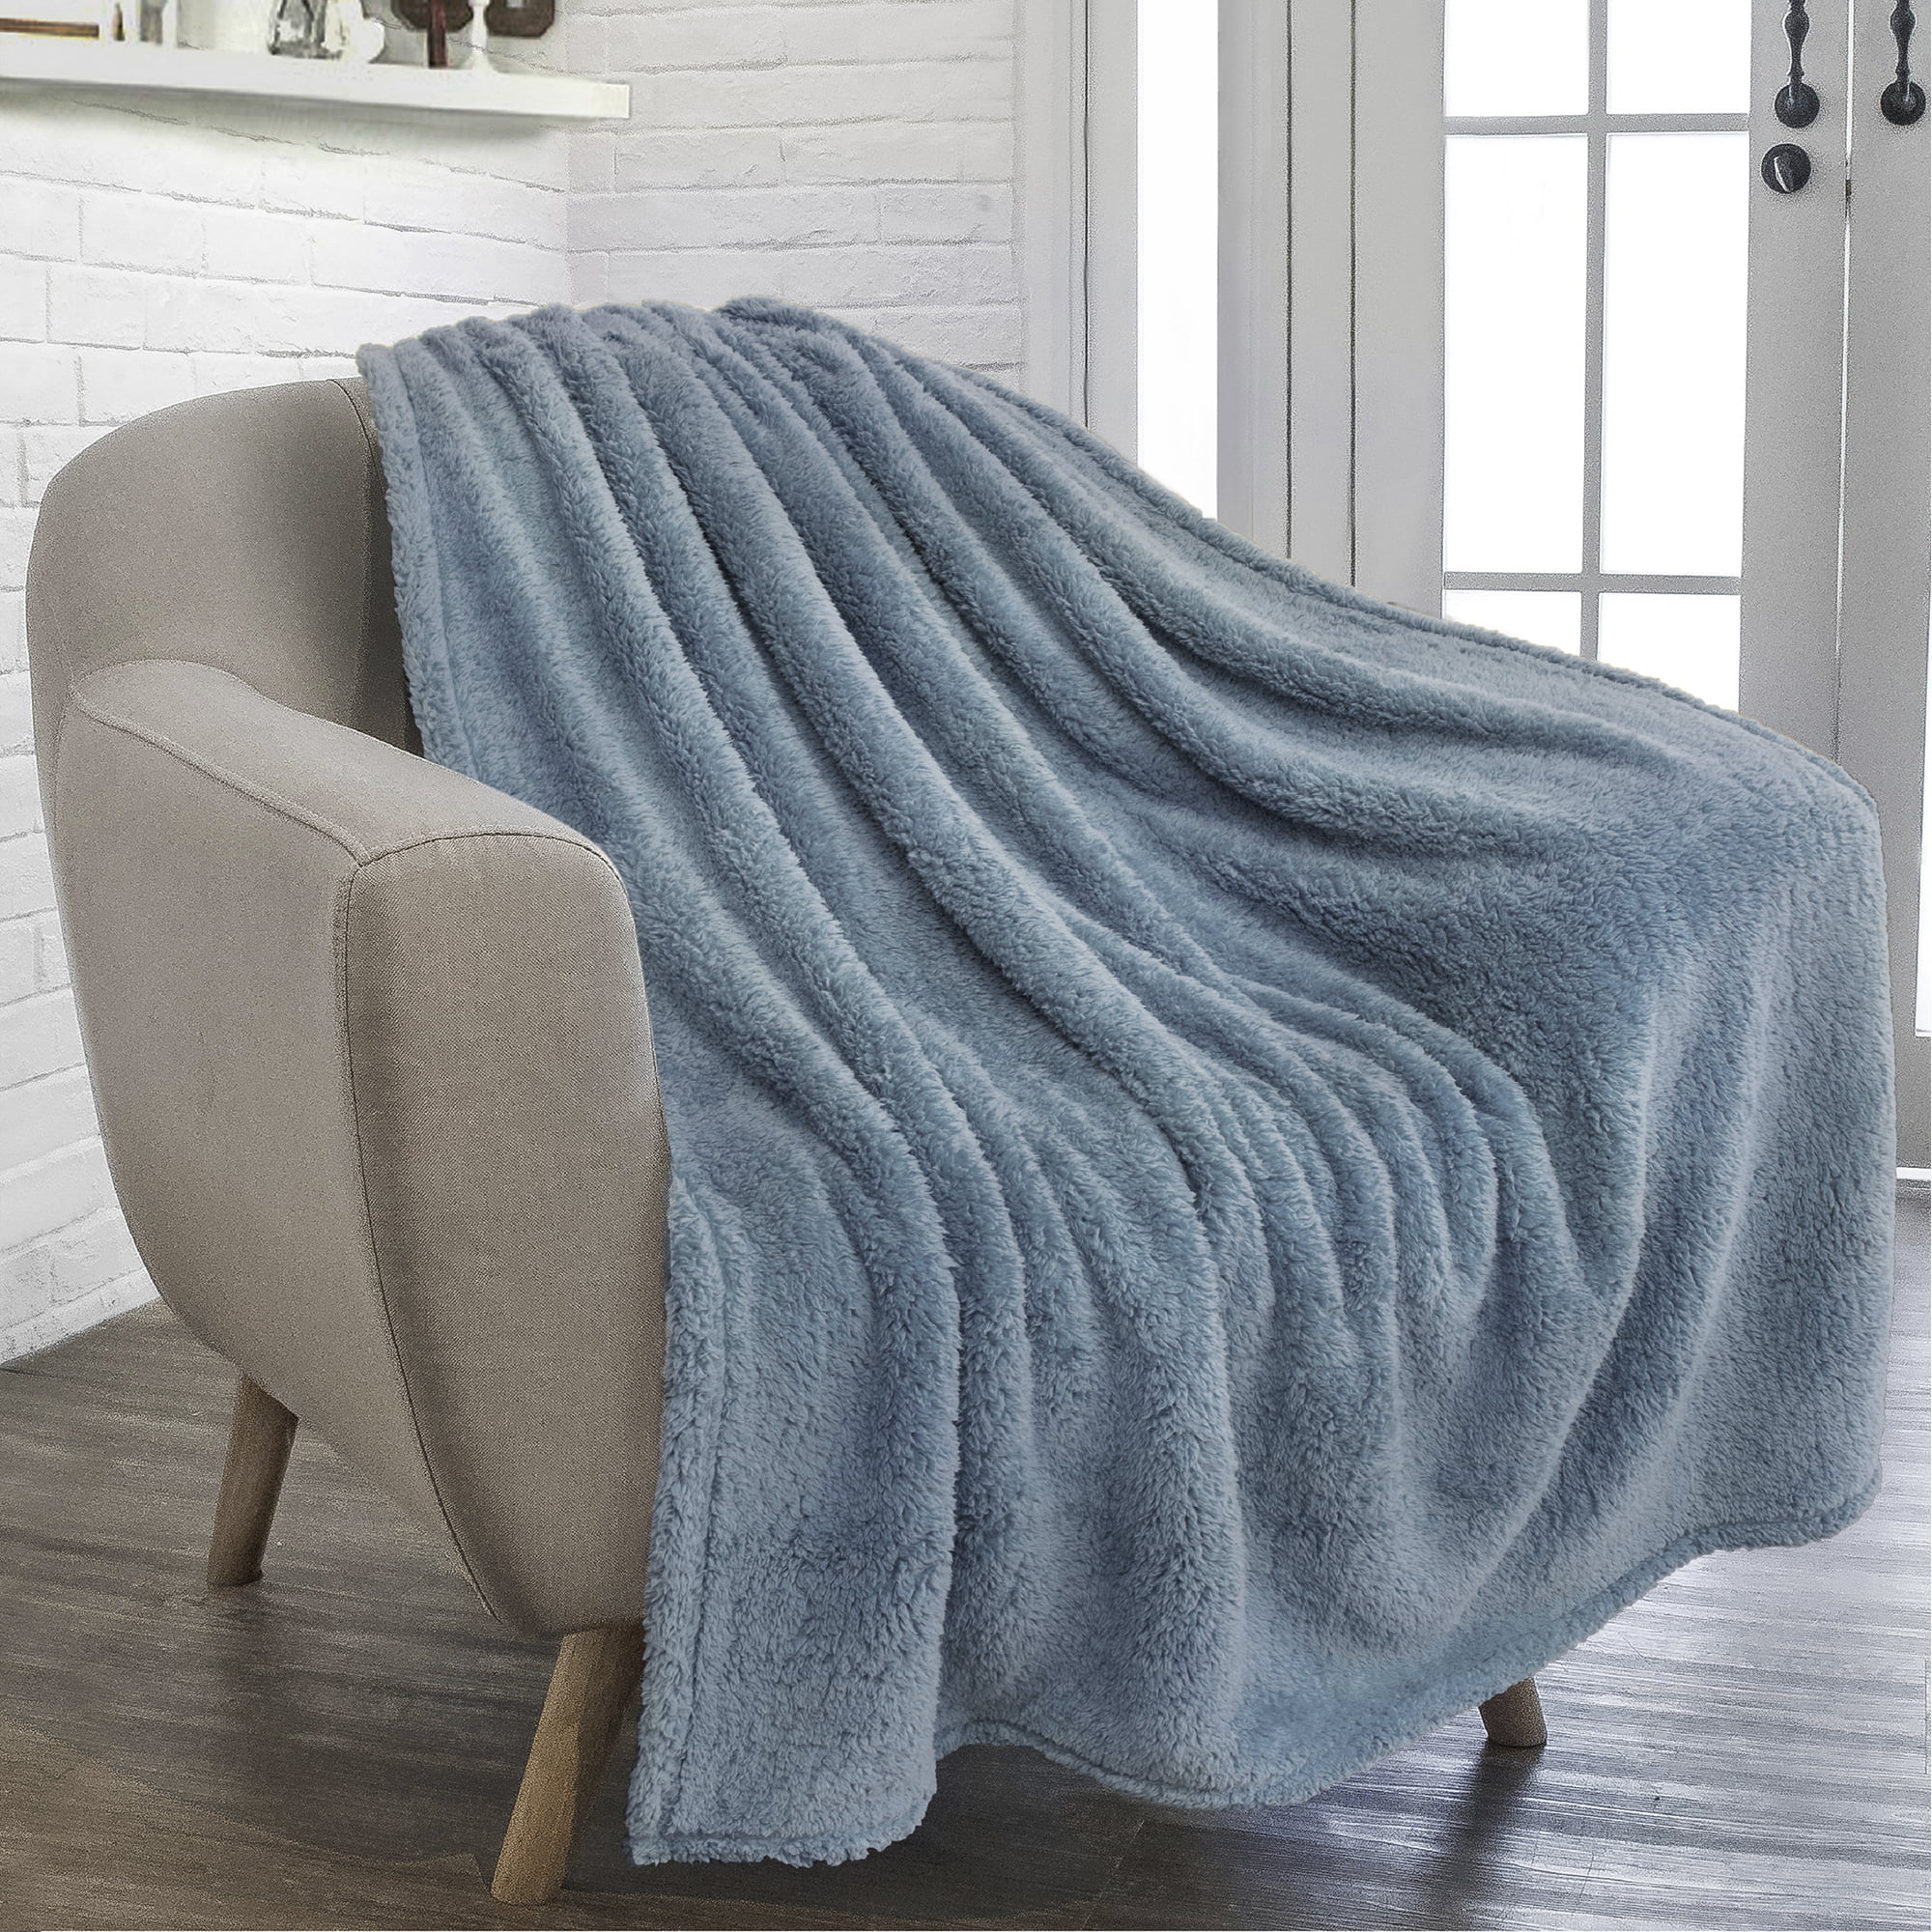 Details about   Soft Fuzzy Warm Cozy Throw Blanket with Fluffy Sherpa Fleece for Sofa Couch Bed 